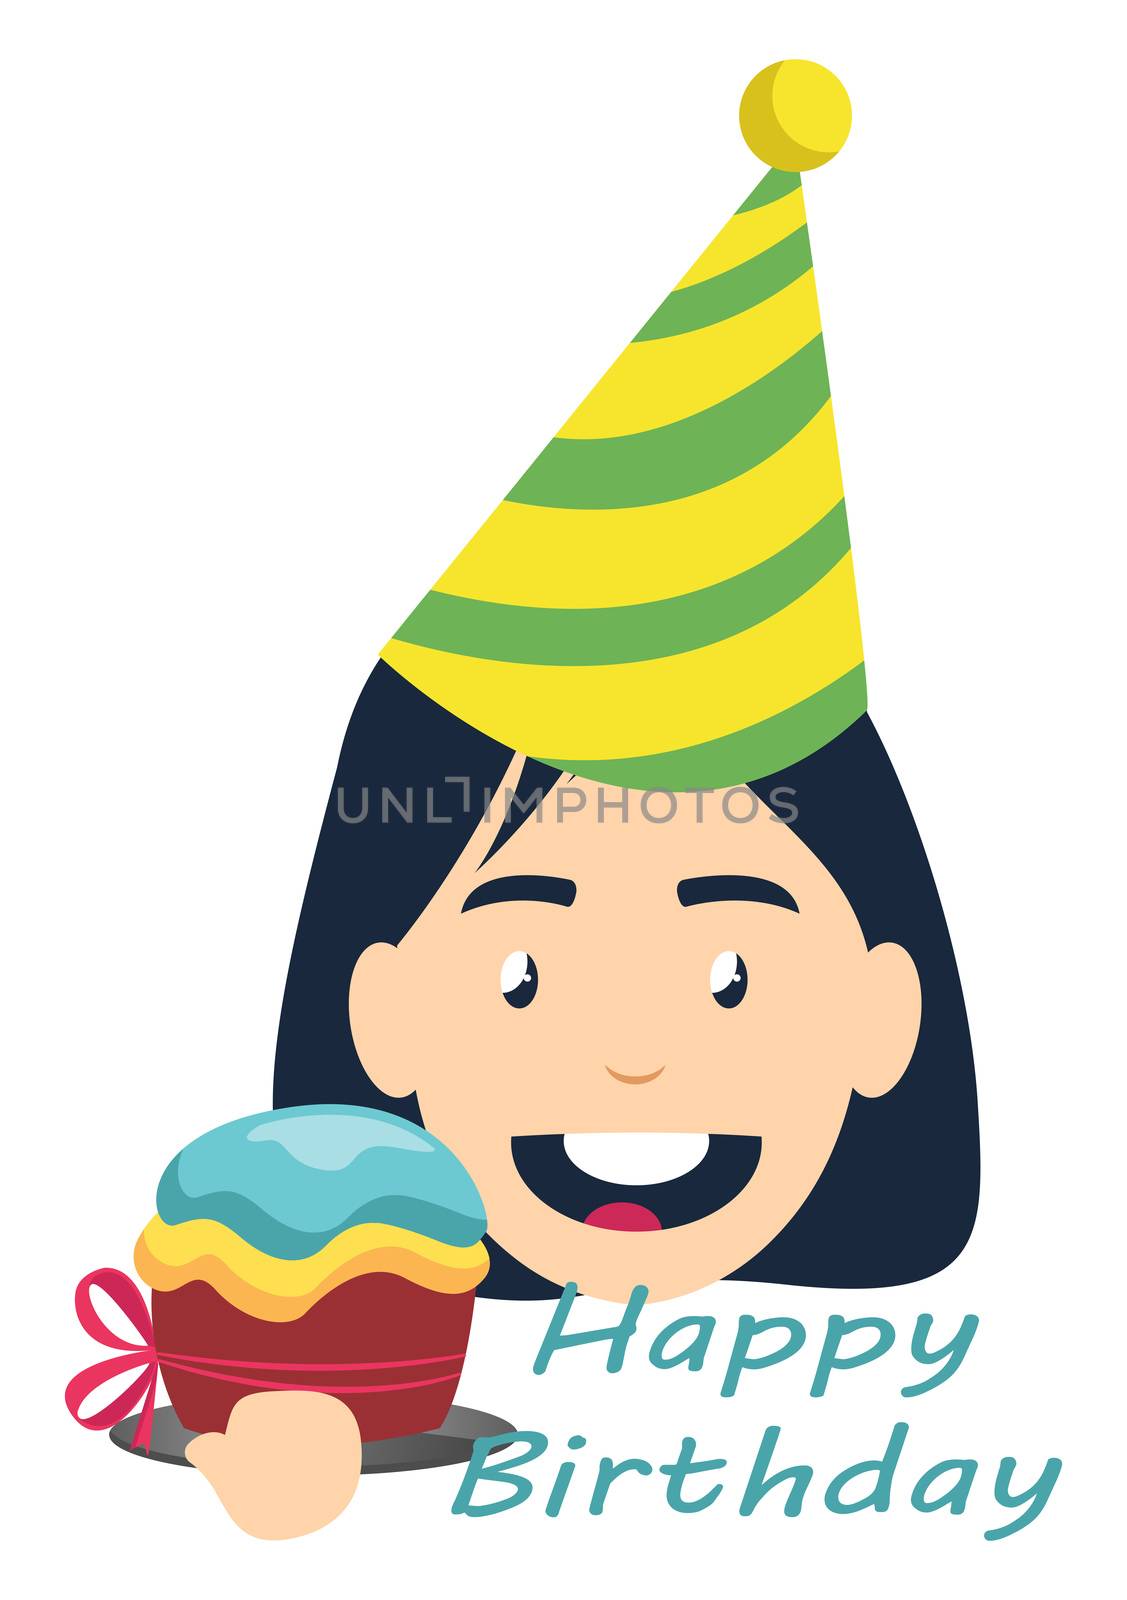 Girl on birthday party, illustration, vector on white background